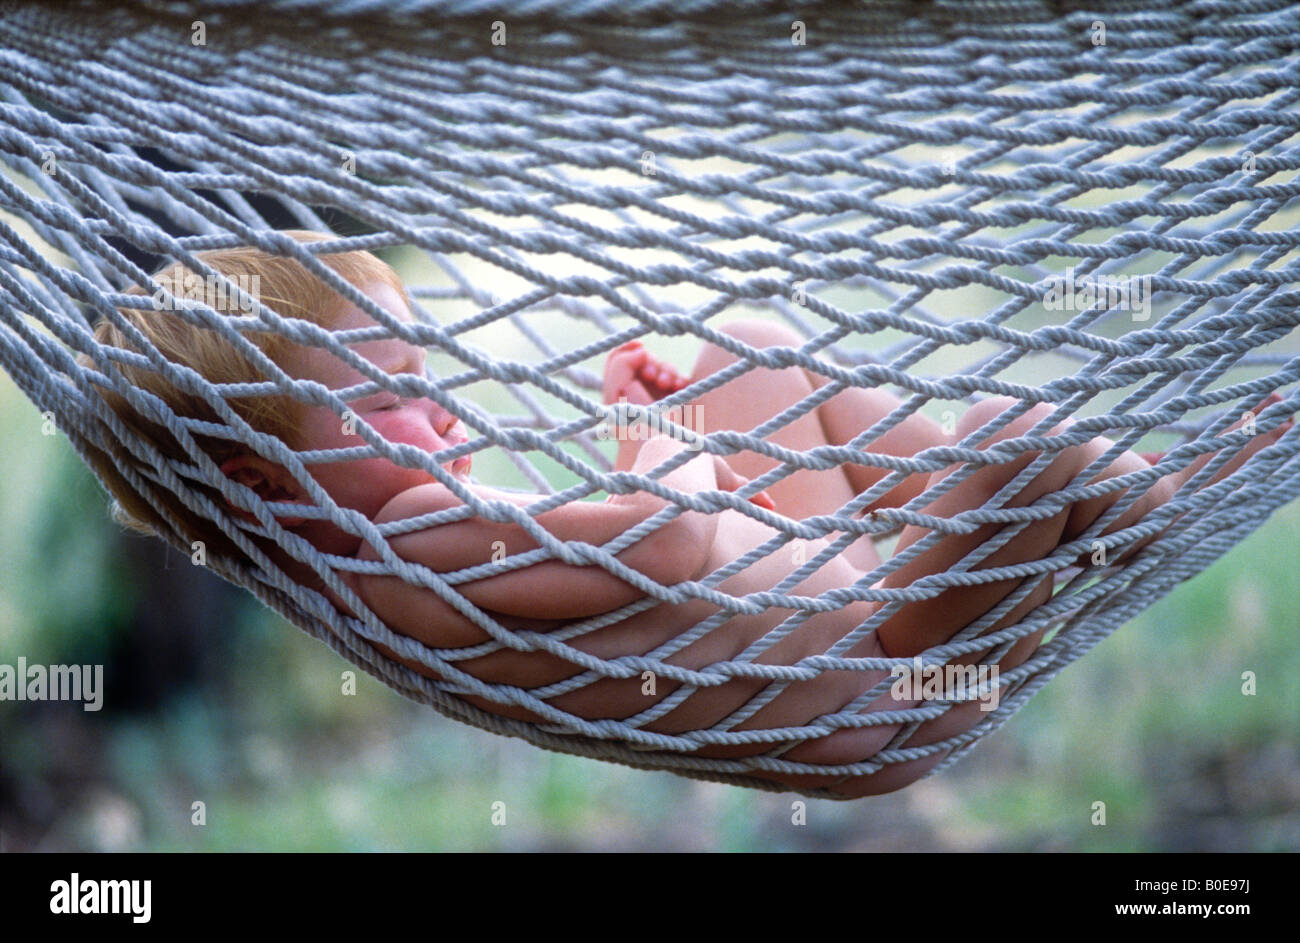 An unclothed baby girl peacefully sleeps in a hammock outdoors. Stock Photo